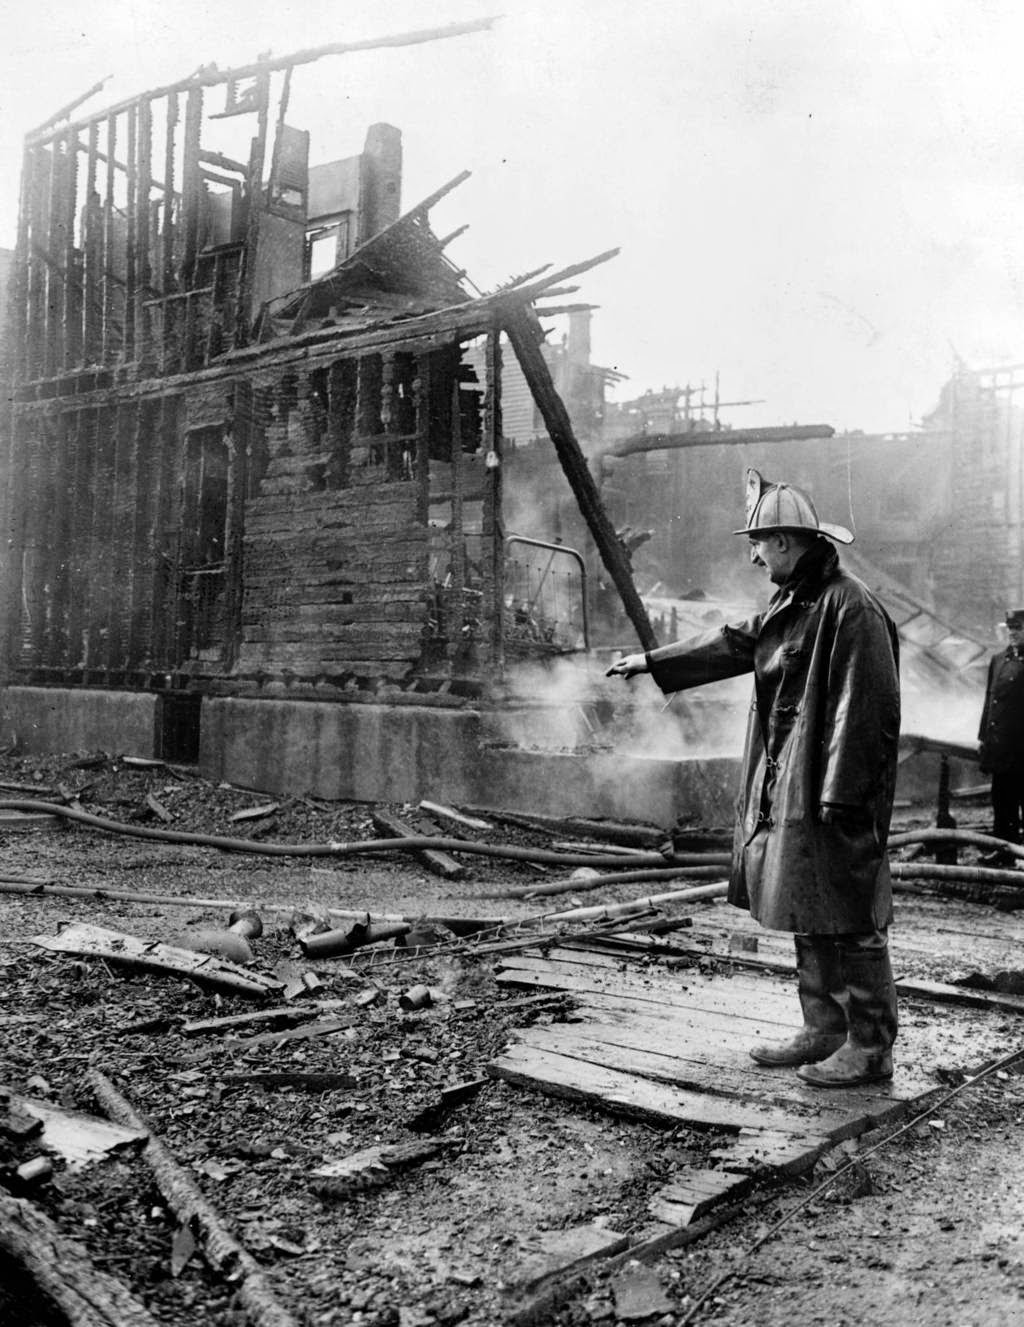  pequeñas curiosidades  - Página 22 A-firefighter-looks-over-a-burned-out-building-during-the-Chicago-race-riots-of-1919.